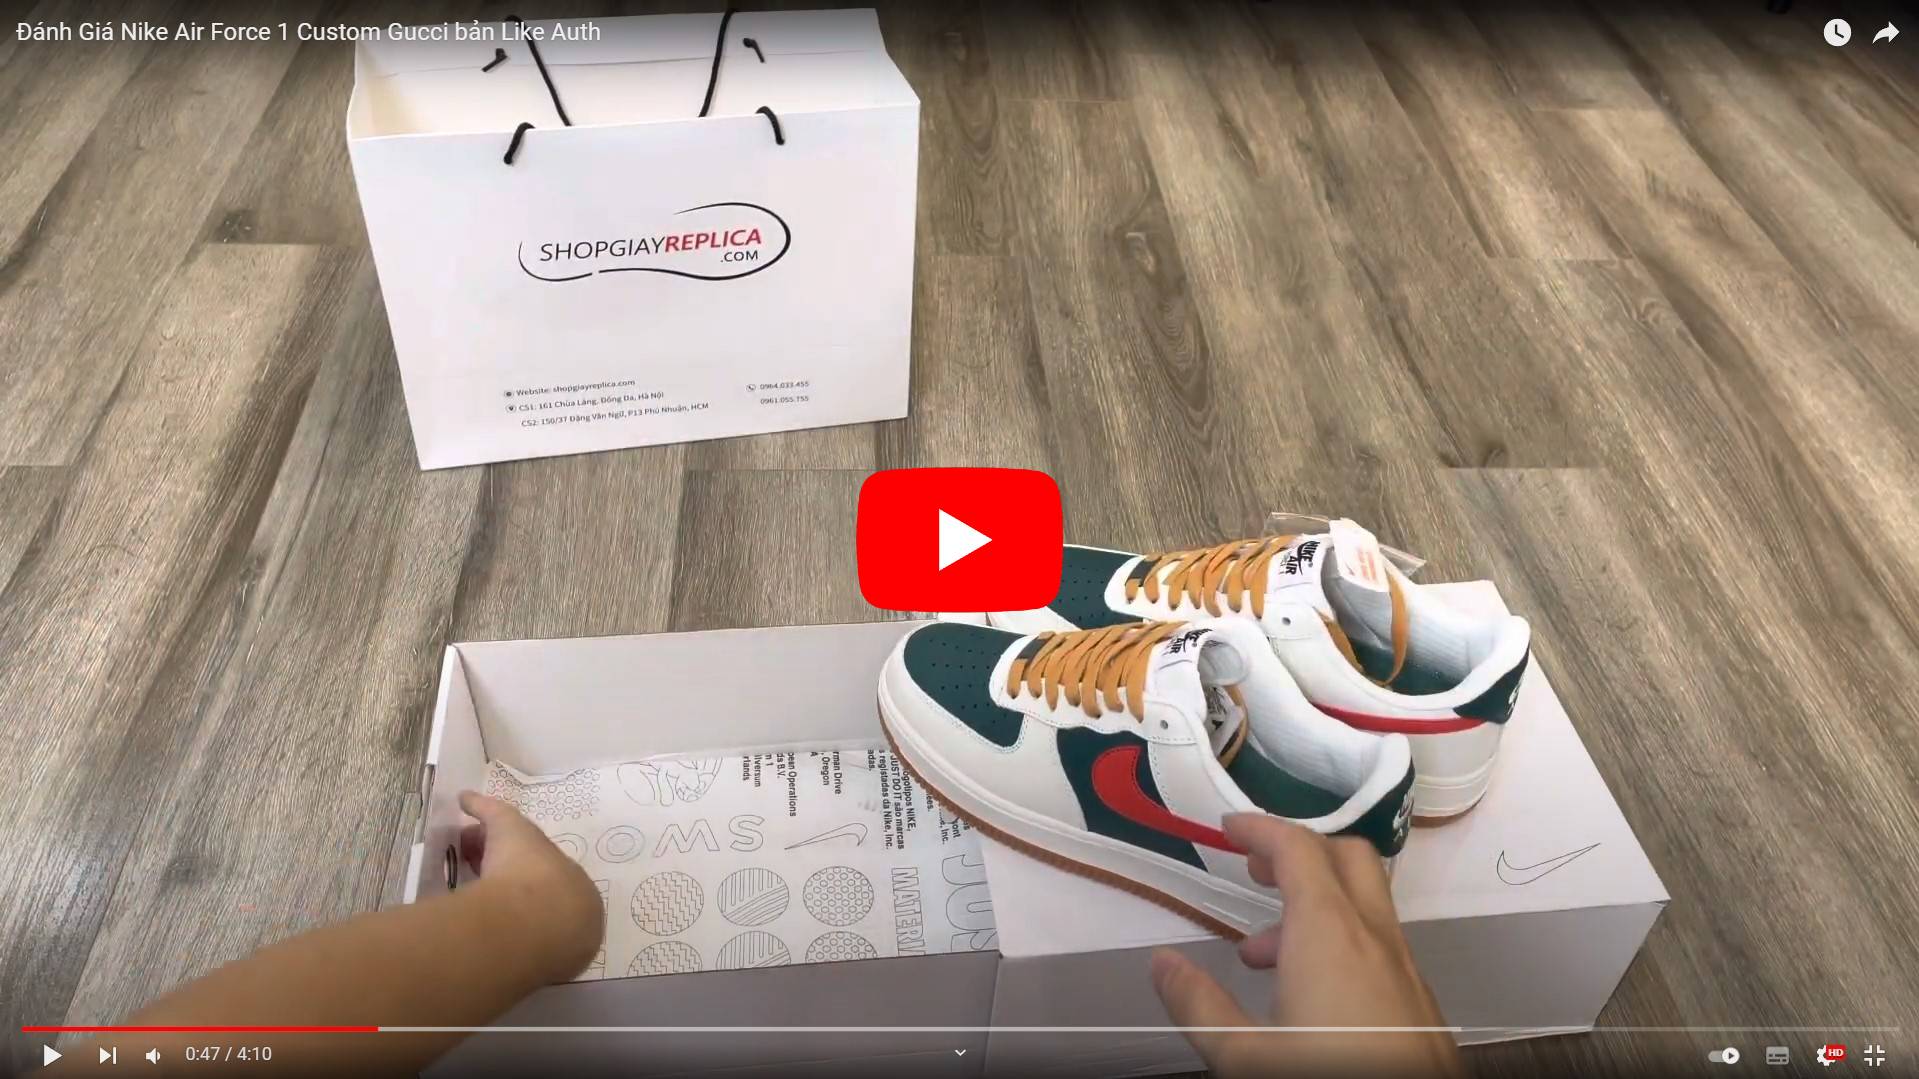 Video Giày Nike Air Force 1 Low ID Gucci Cream Green Red Like Auth